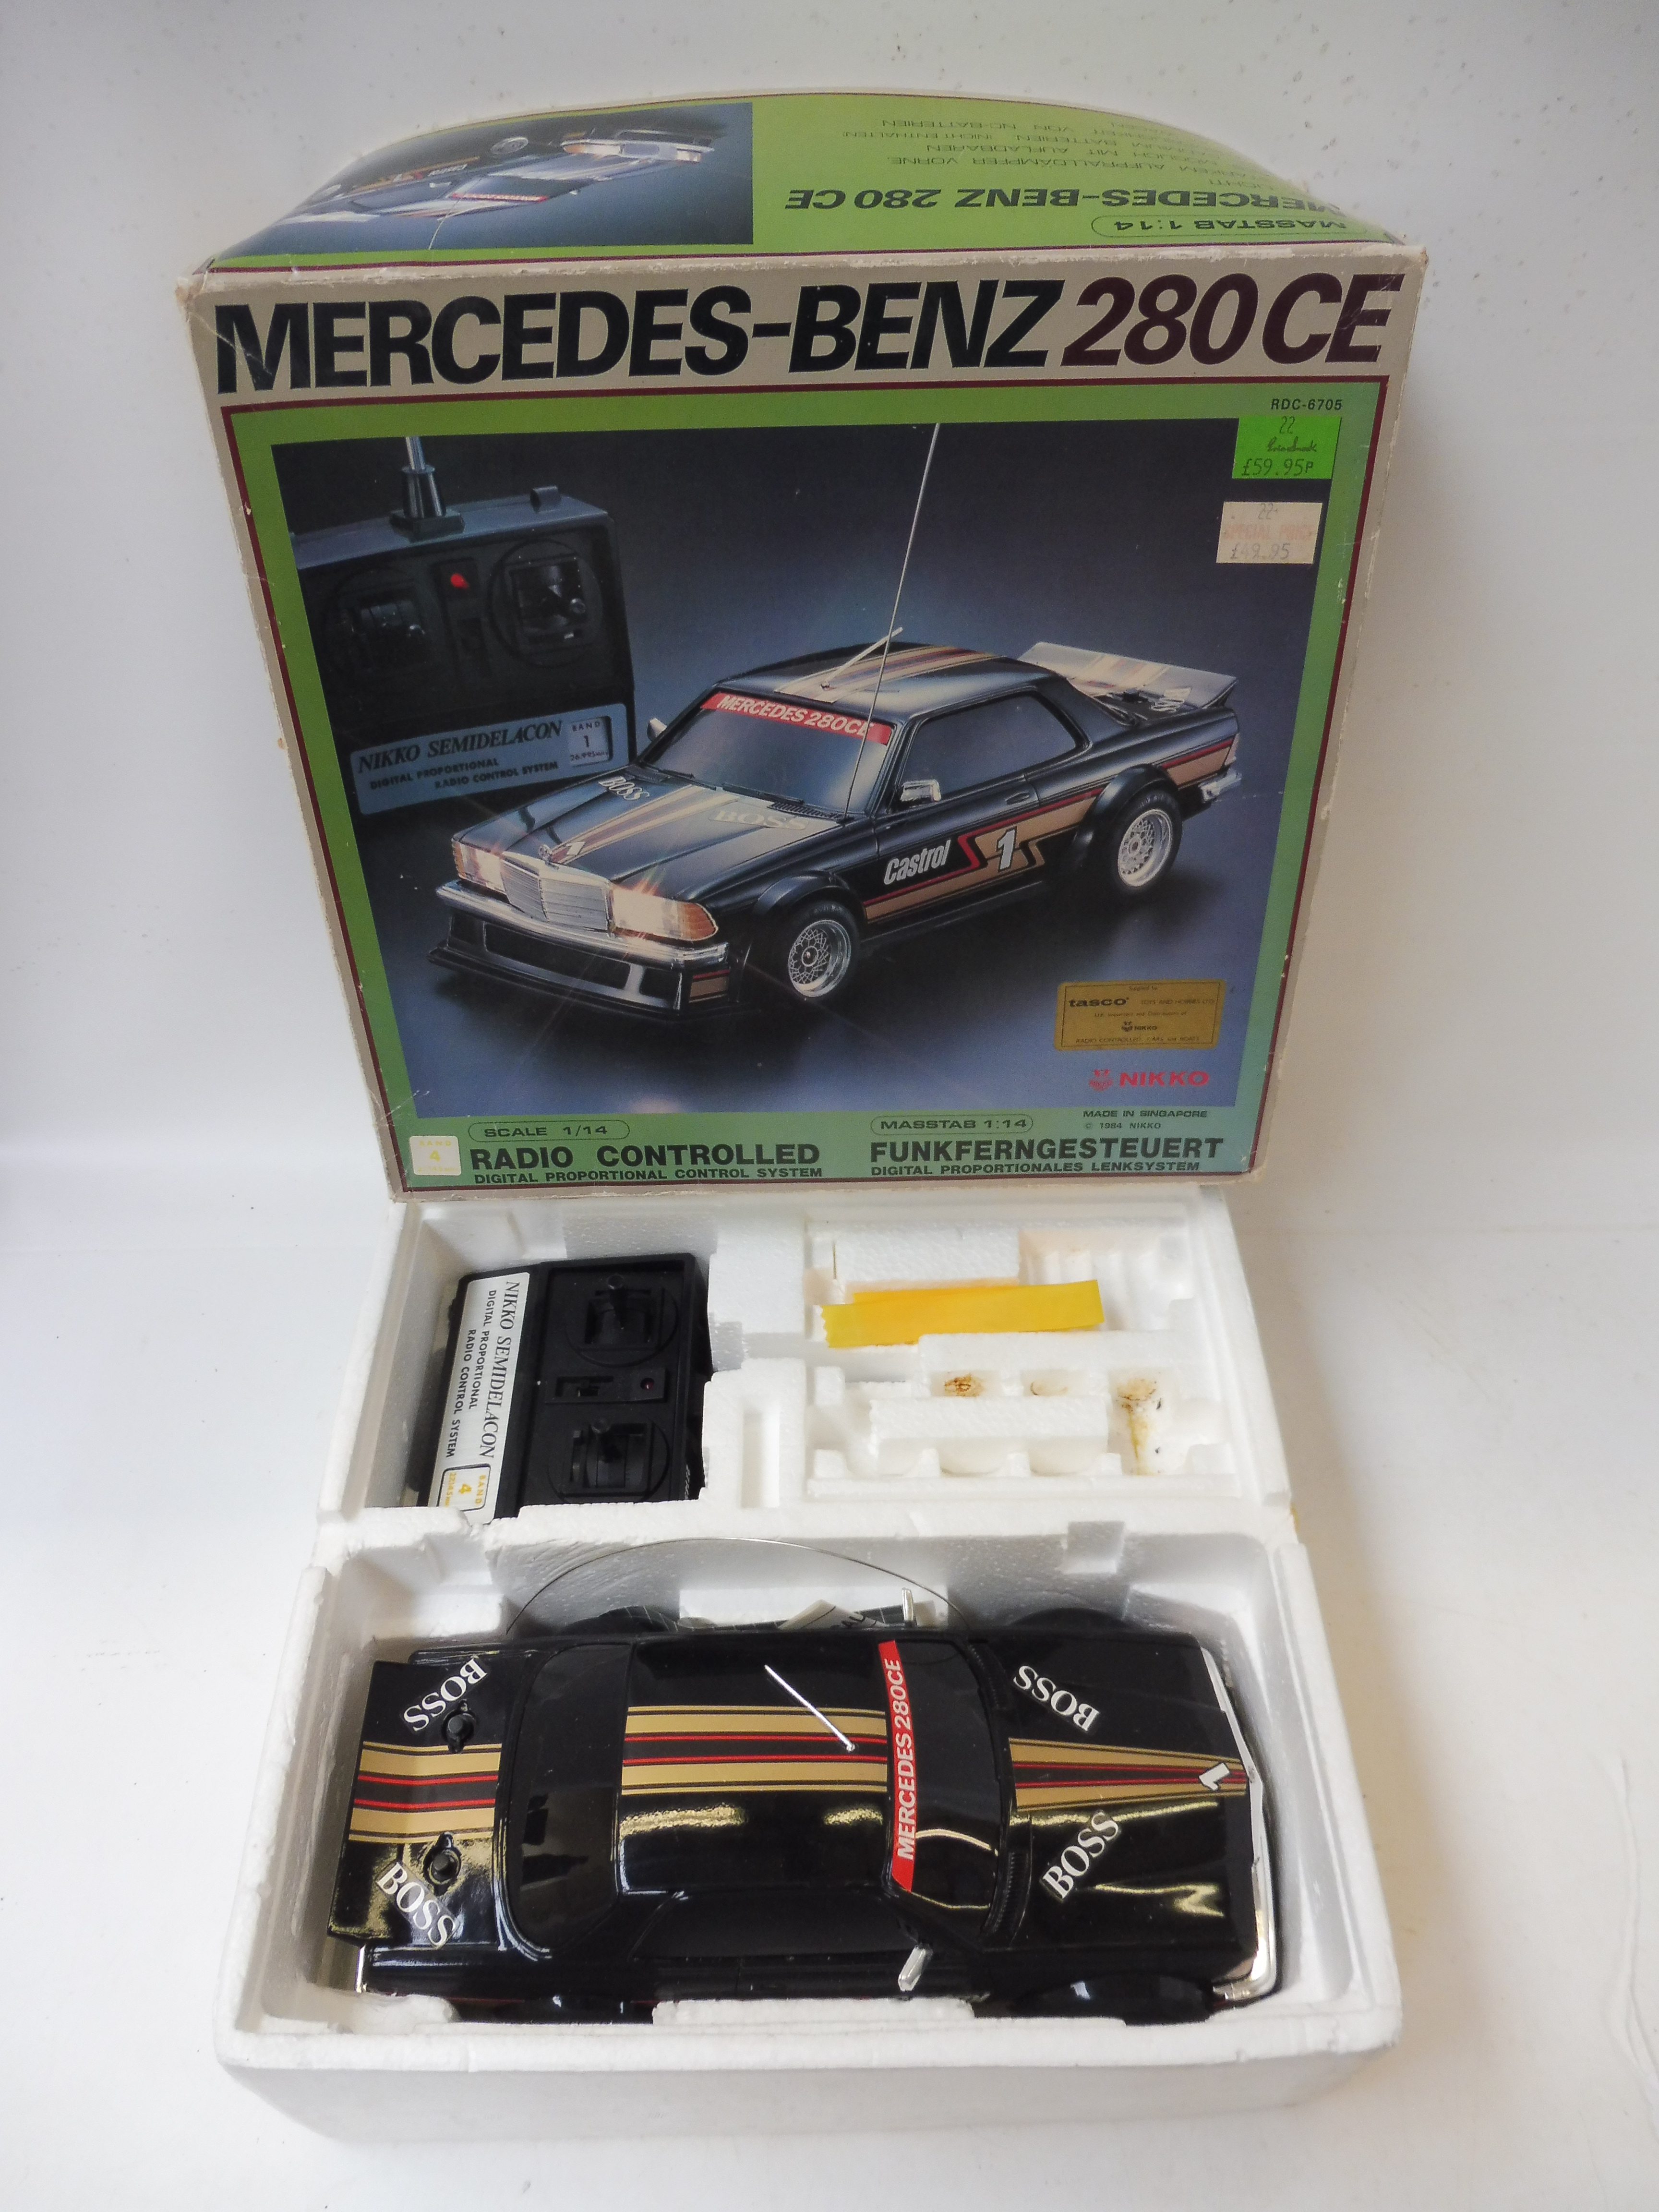 A boxed Mercedes-Benz 280CE radio controlled car.